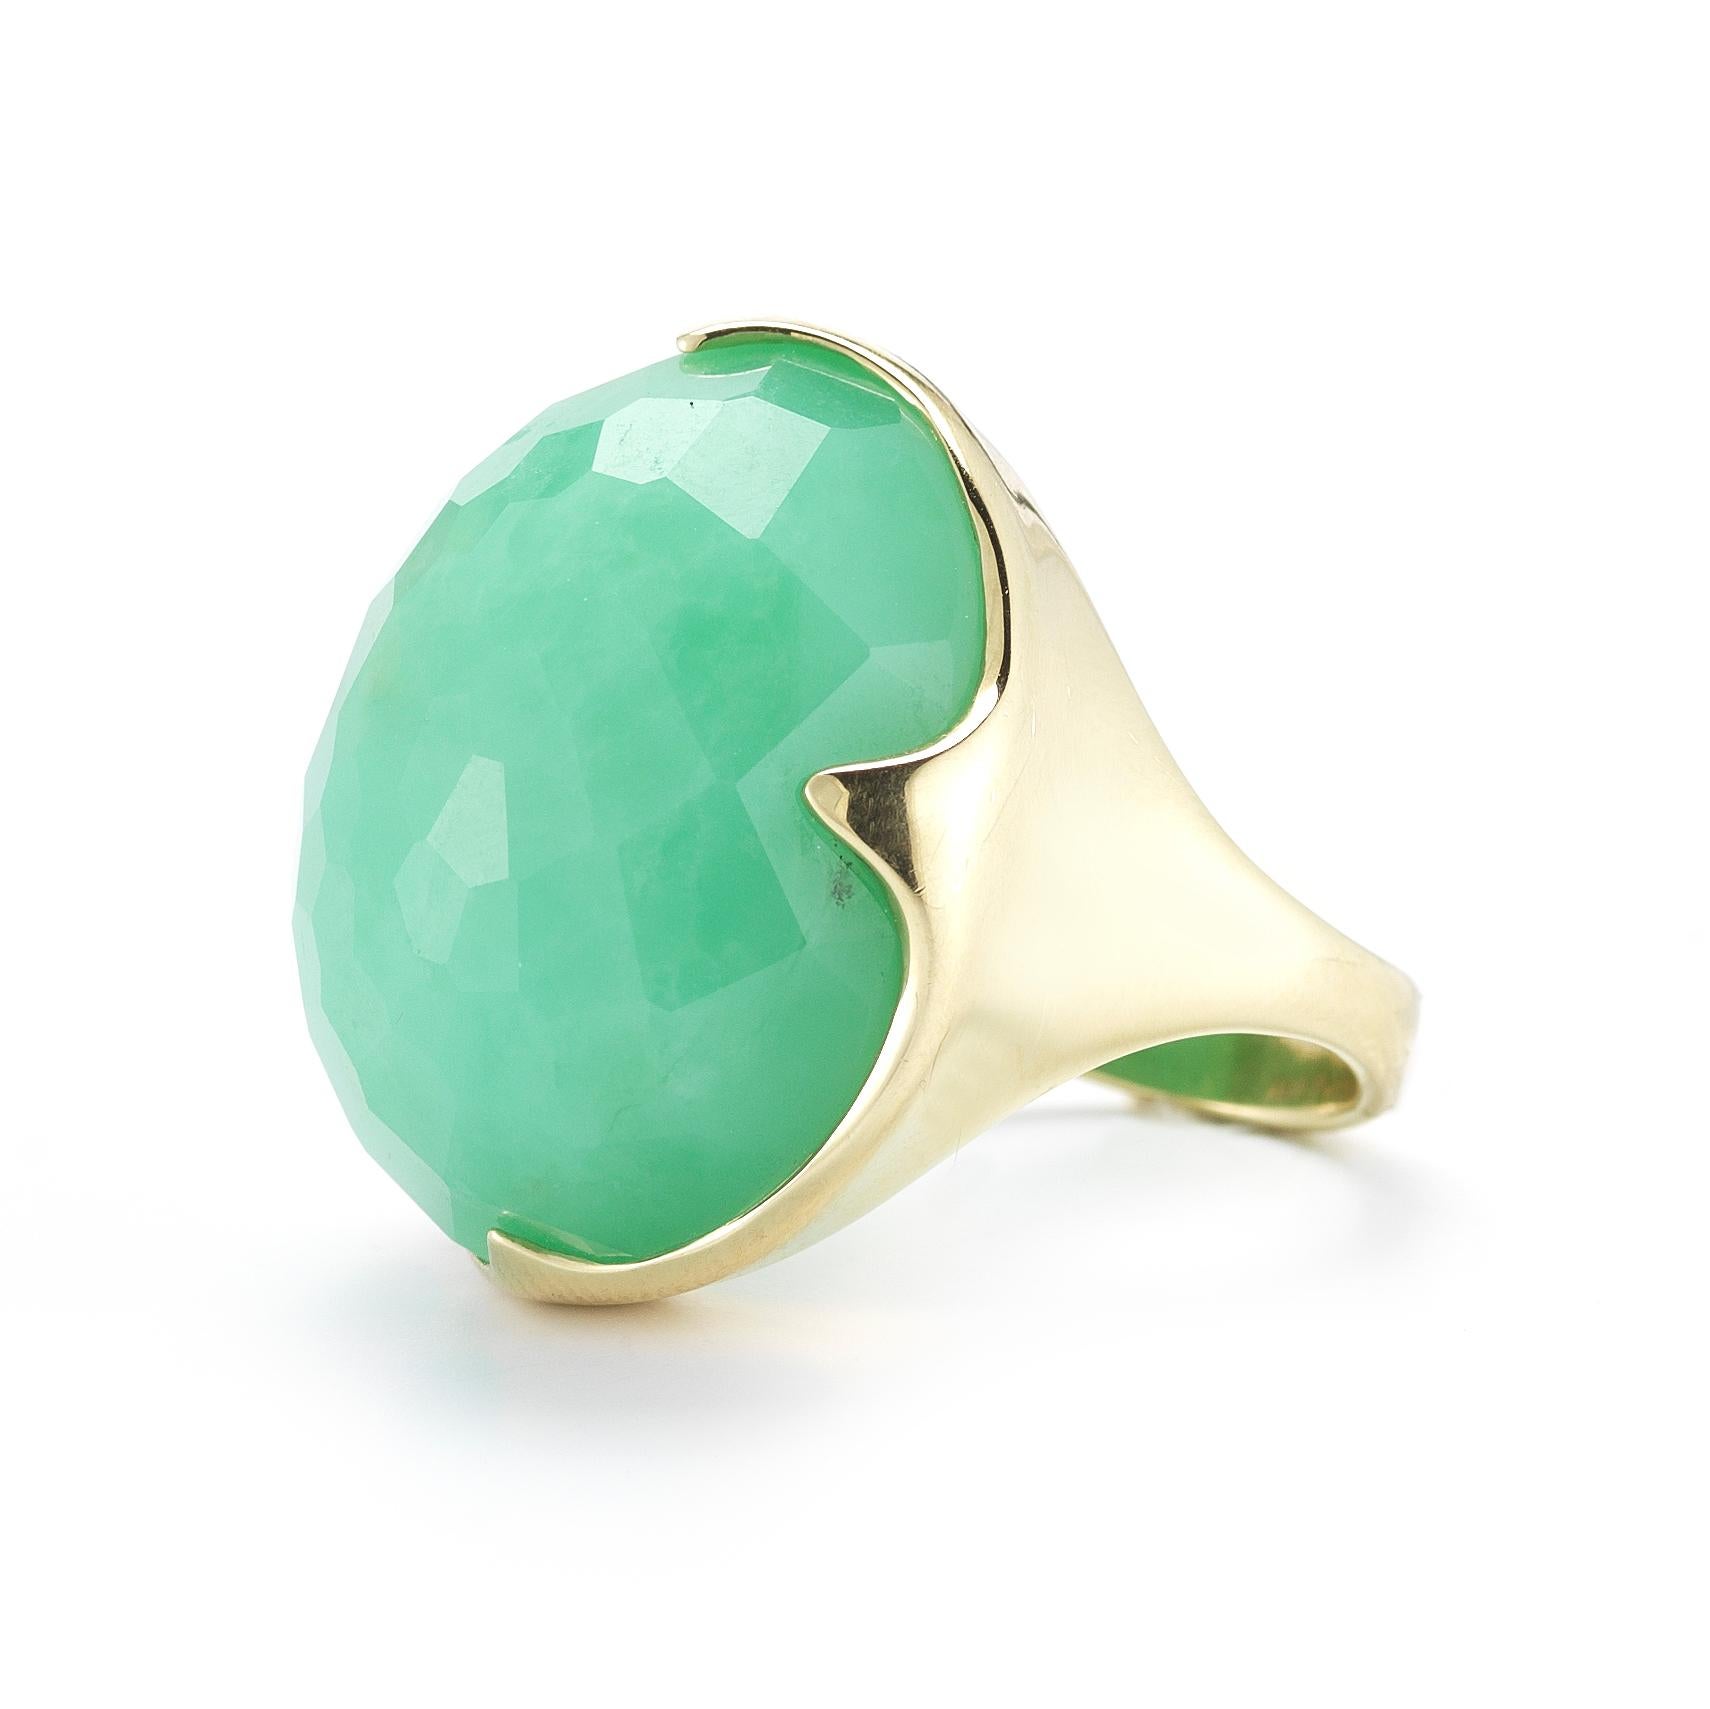 Ippolita 18 Karat Yellow Gold Rock Candy Chrysoprase Large Oval Cocktail Ring

A faceted large scale oval chrysoprase is mounted in 18 karat yellow gold, signed Ippolita. RIng size 7.